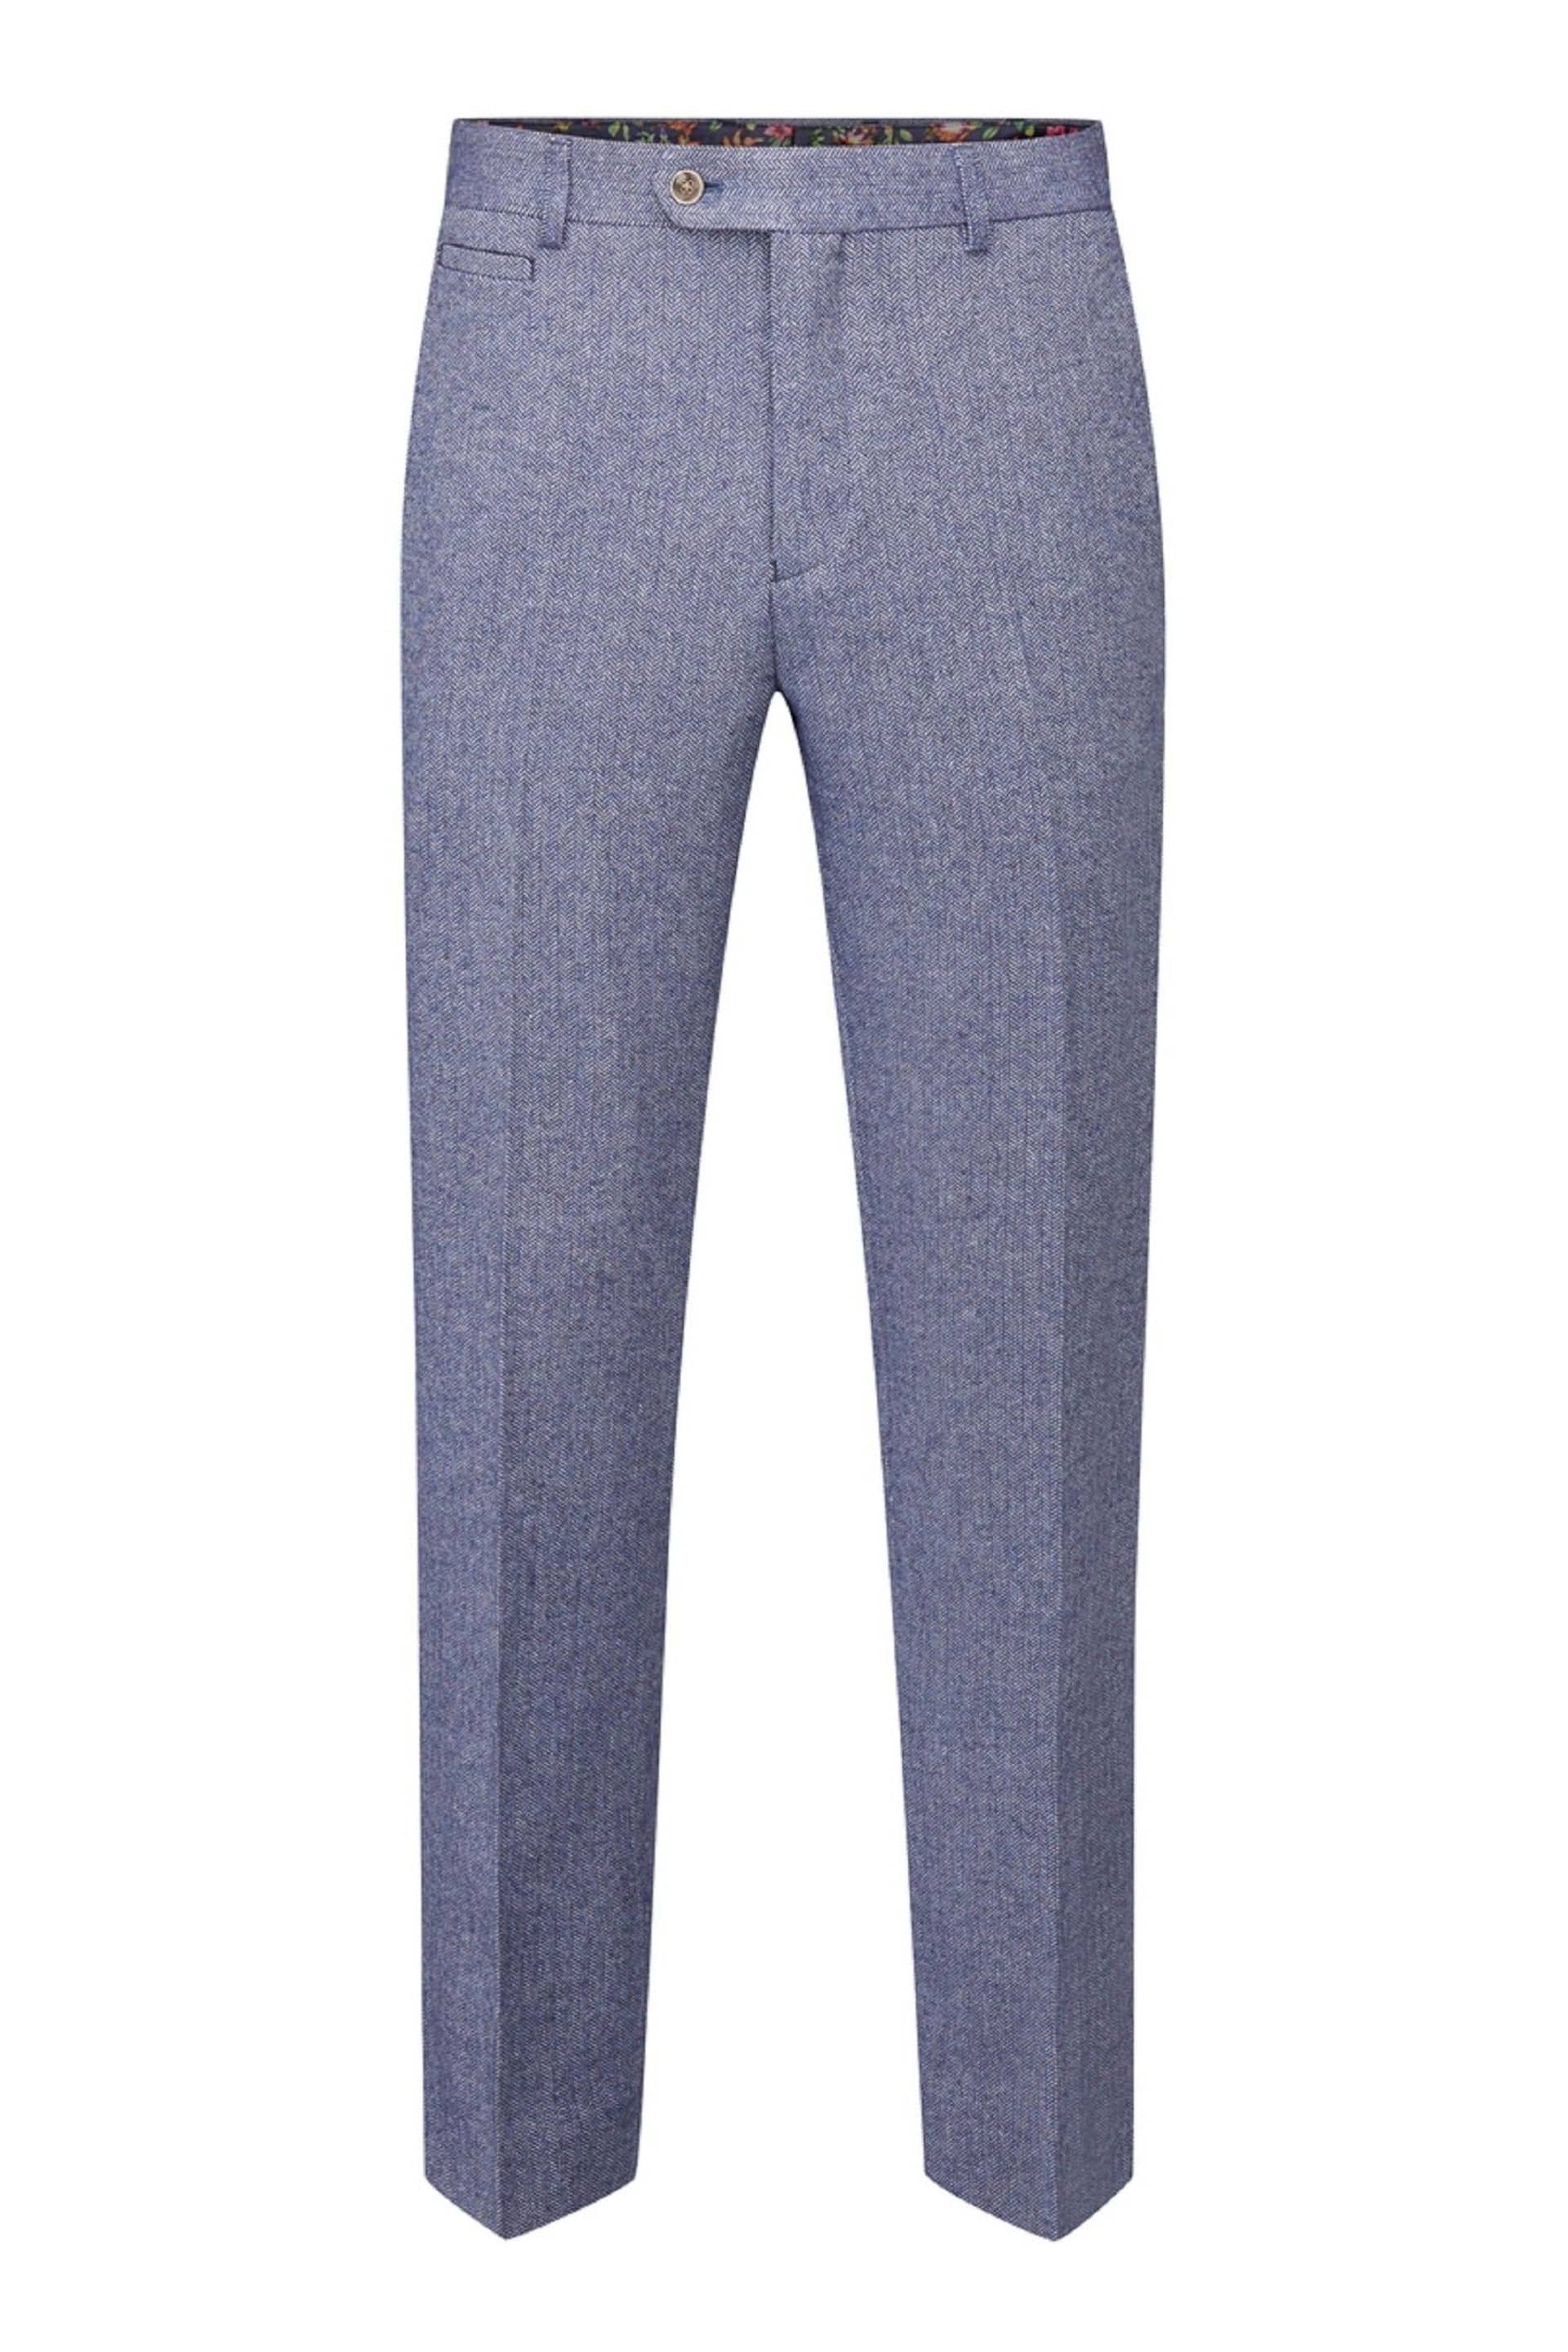 Skopes Jude Tweed Tailored Fit Suit Trousers - Image 3 of 4